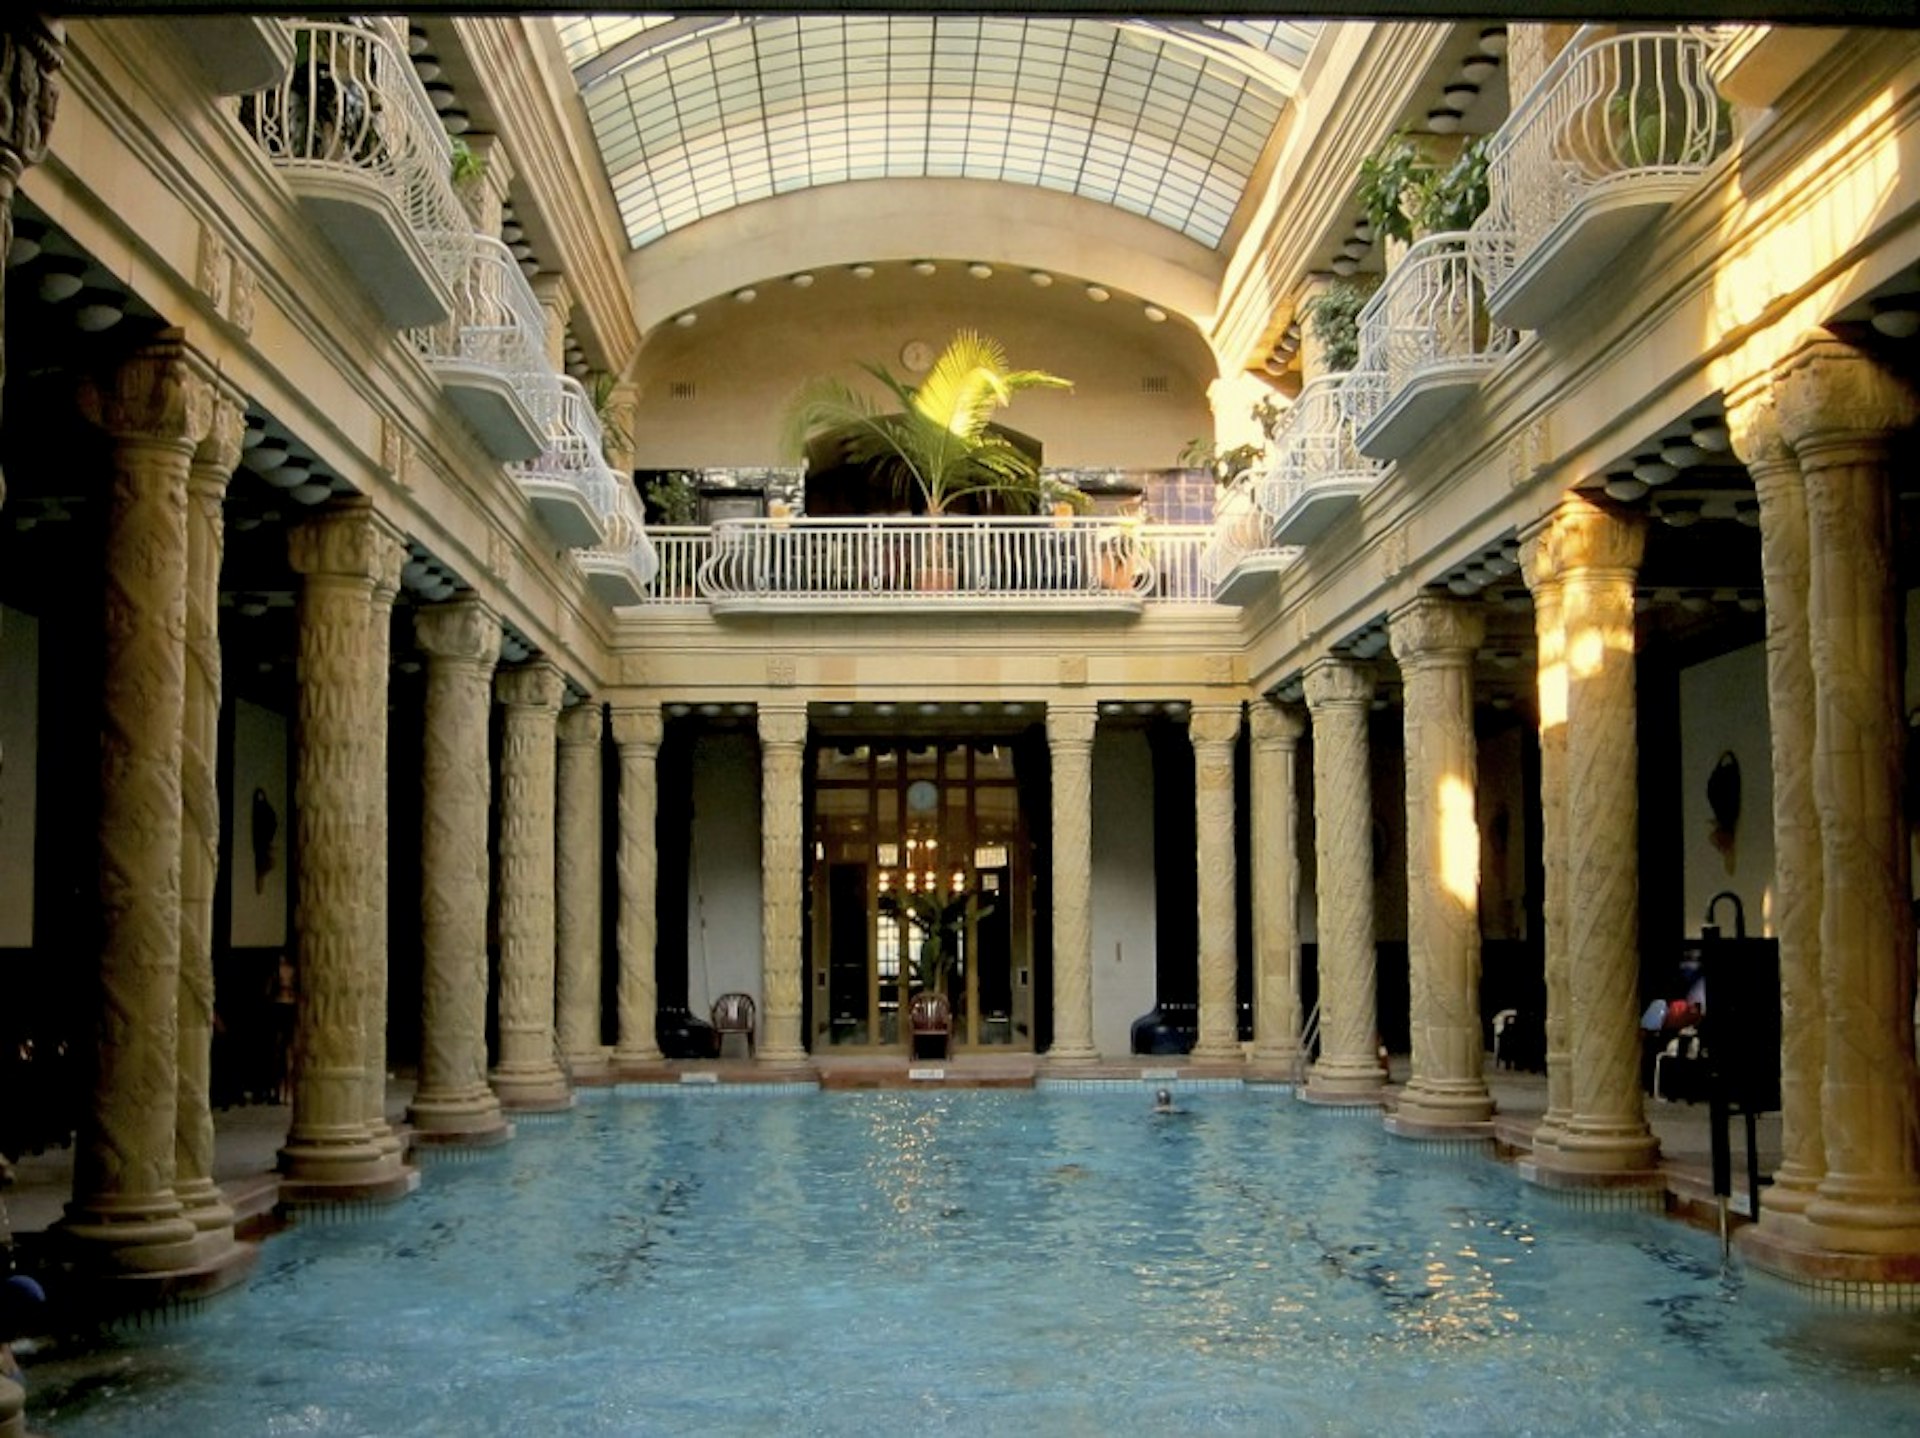 The cram-colonnaded indoor pool at Gellért Baths, Budapest shimmers in the sunlight that lands on its surface through the glass-roof like crepuscular rays on the ocean. The pool is surrounded one floor up by white Juliet balconies. 